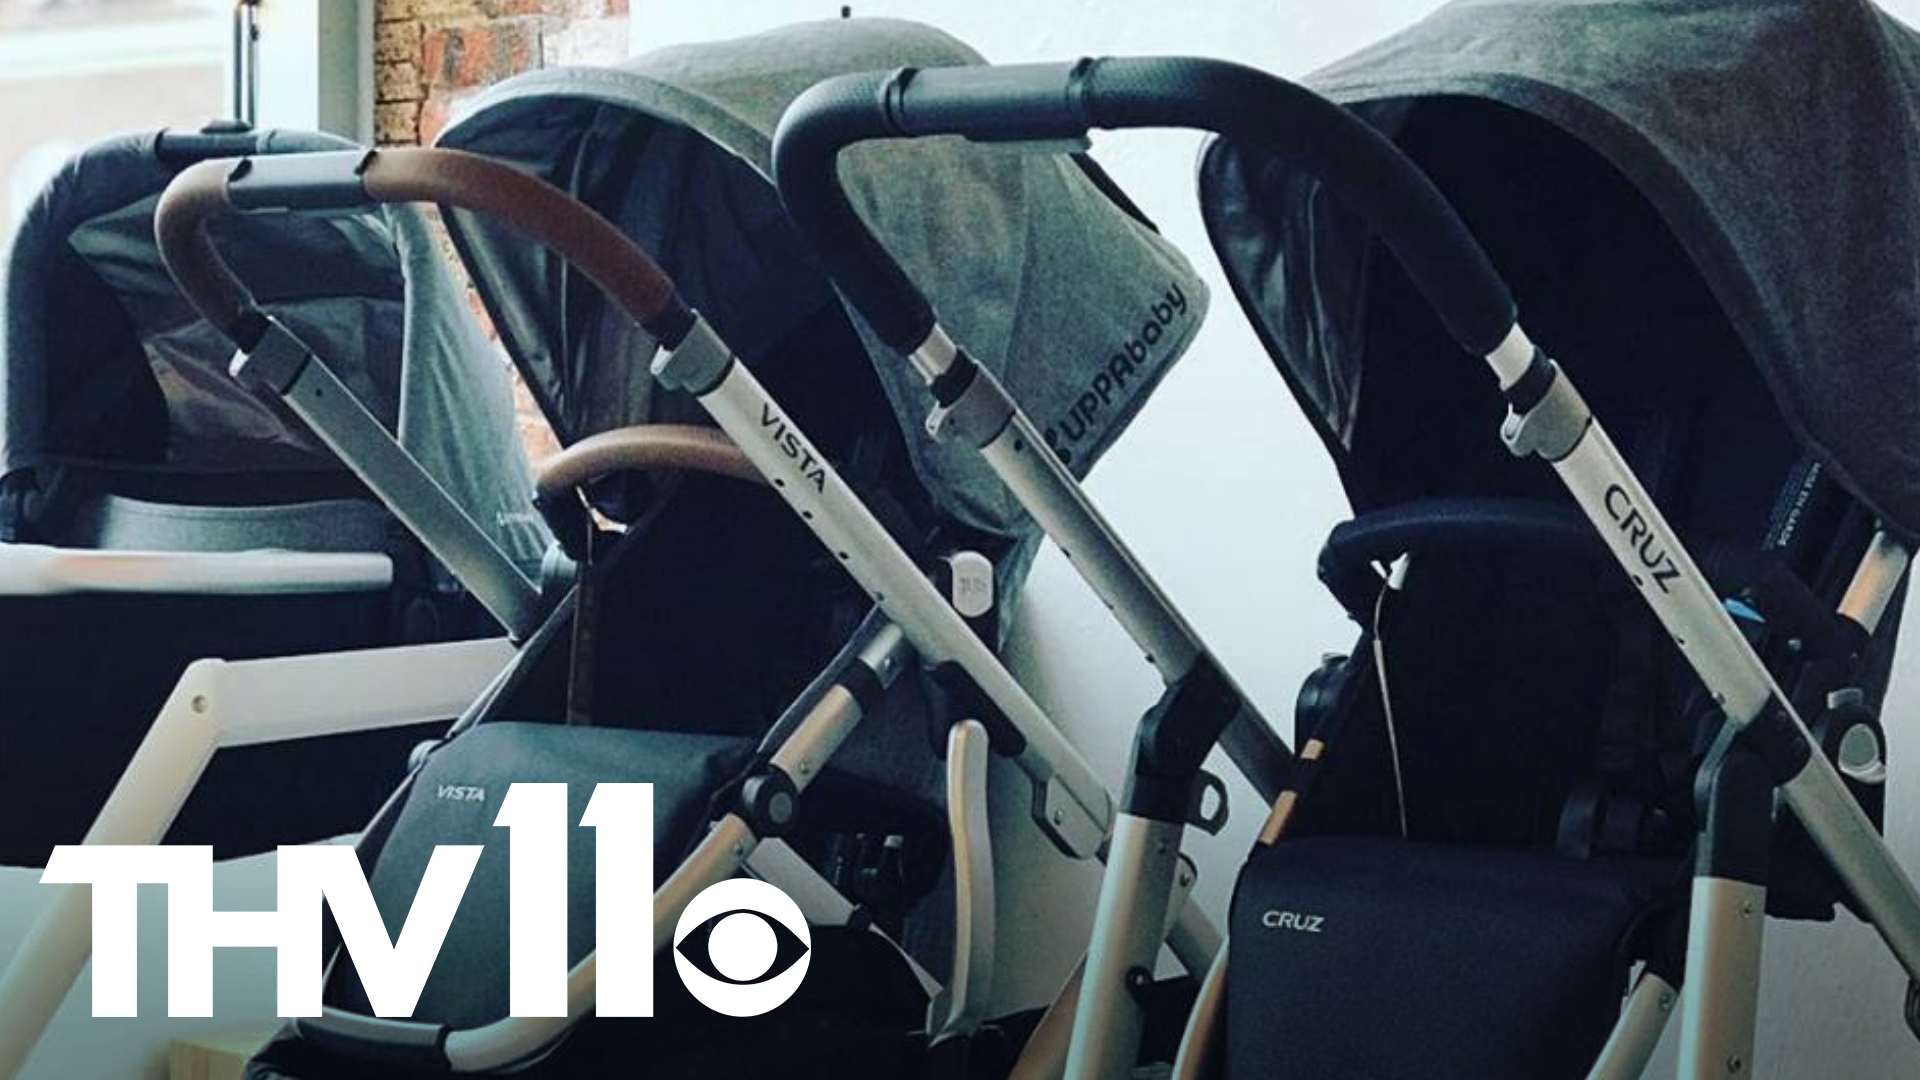 People often think covering the stroller is safe to protect their little one from the sun. However, one expert says it’s the wrong thing to do.